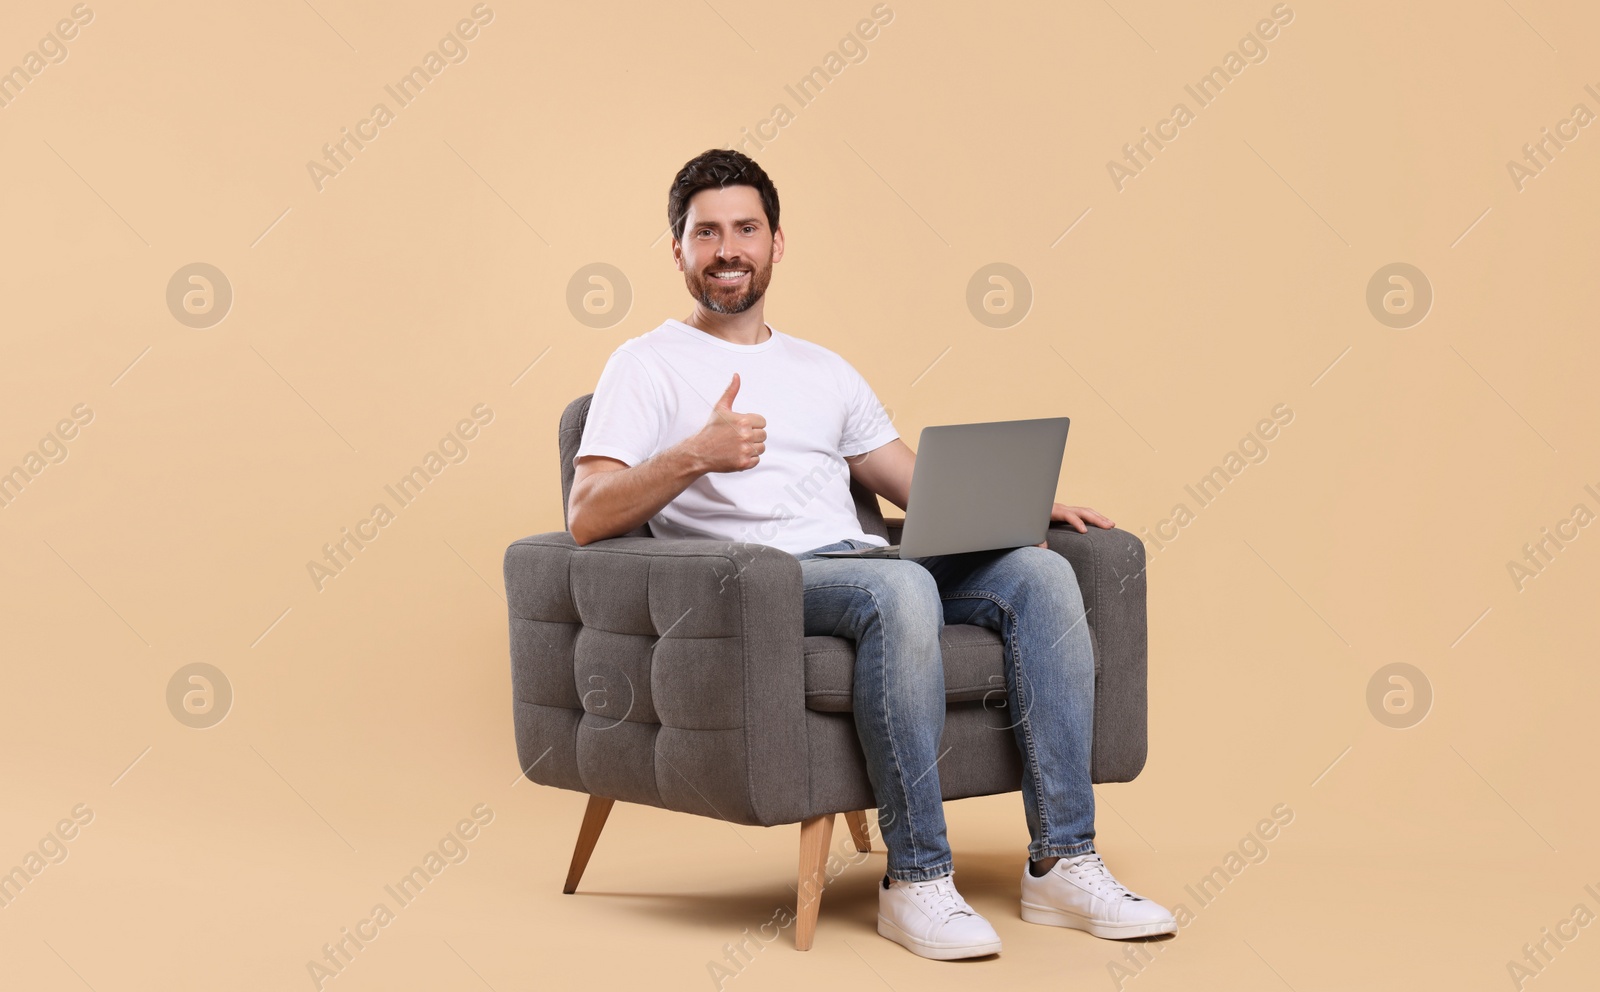 Photo of Happy man with laptop sitting in armchair and showing thumb up against beige background. Space for text